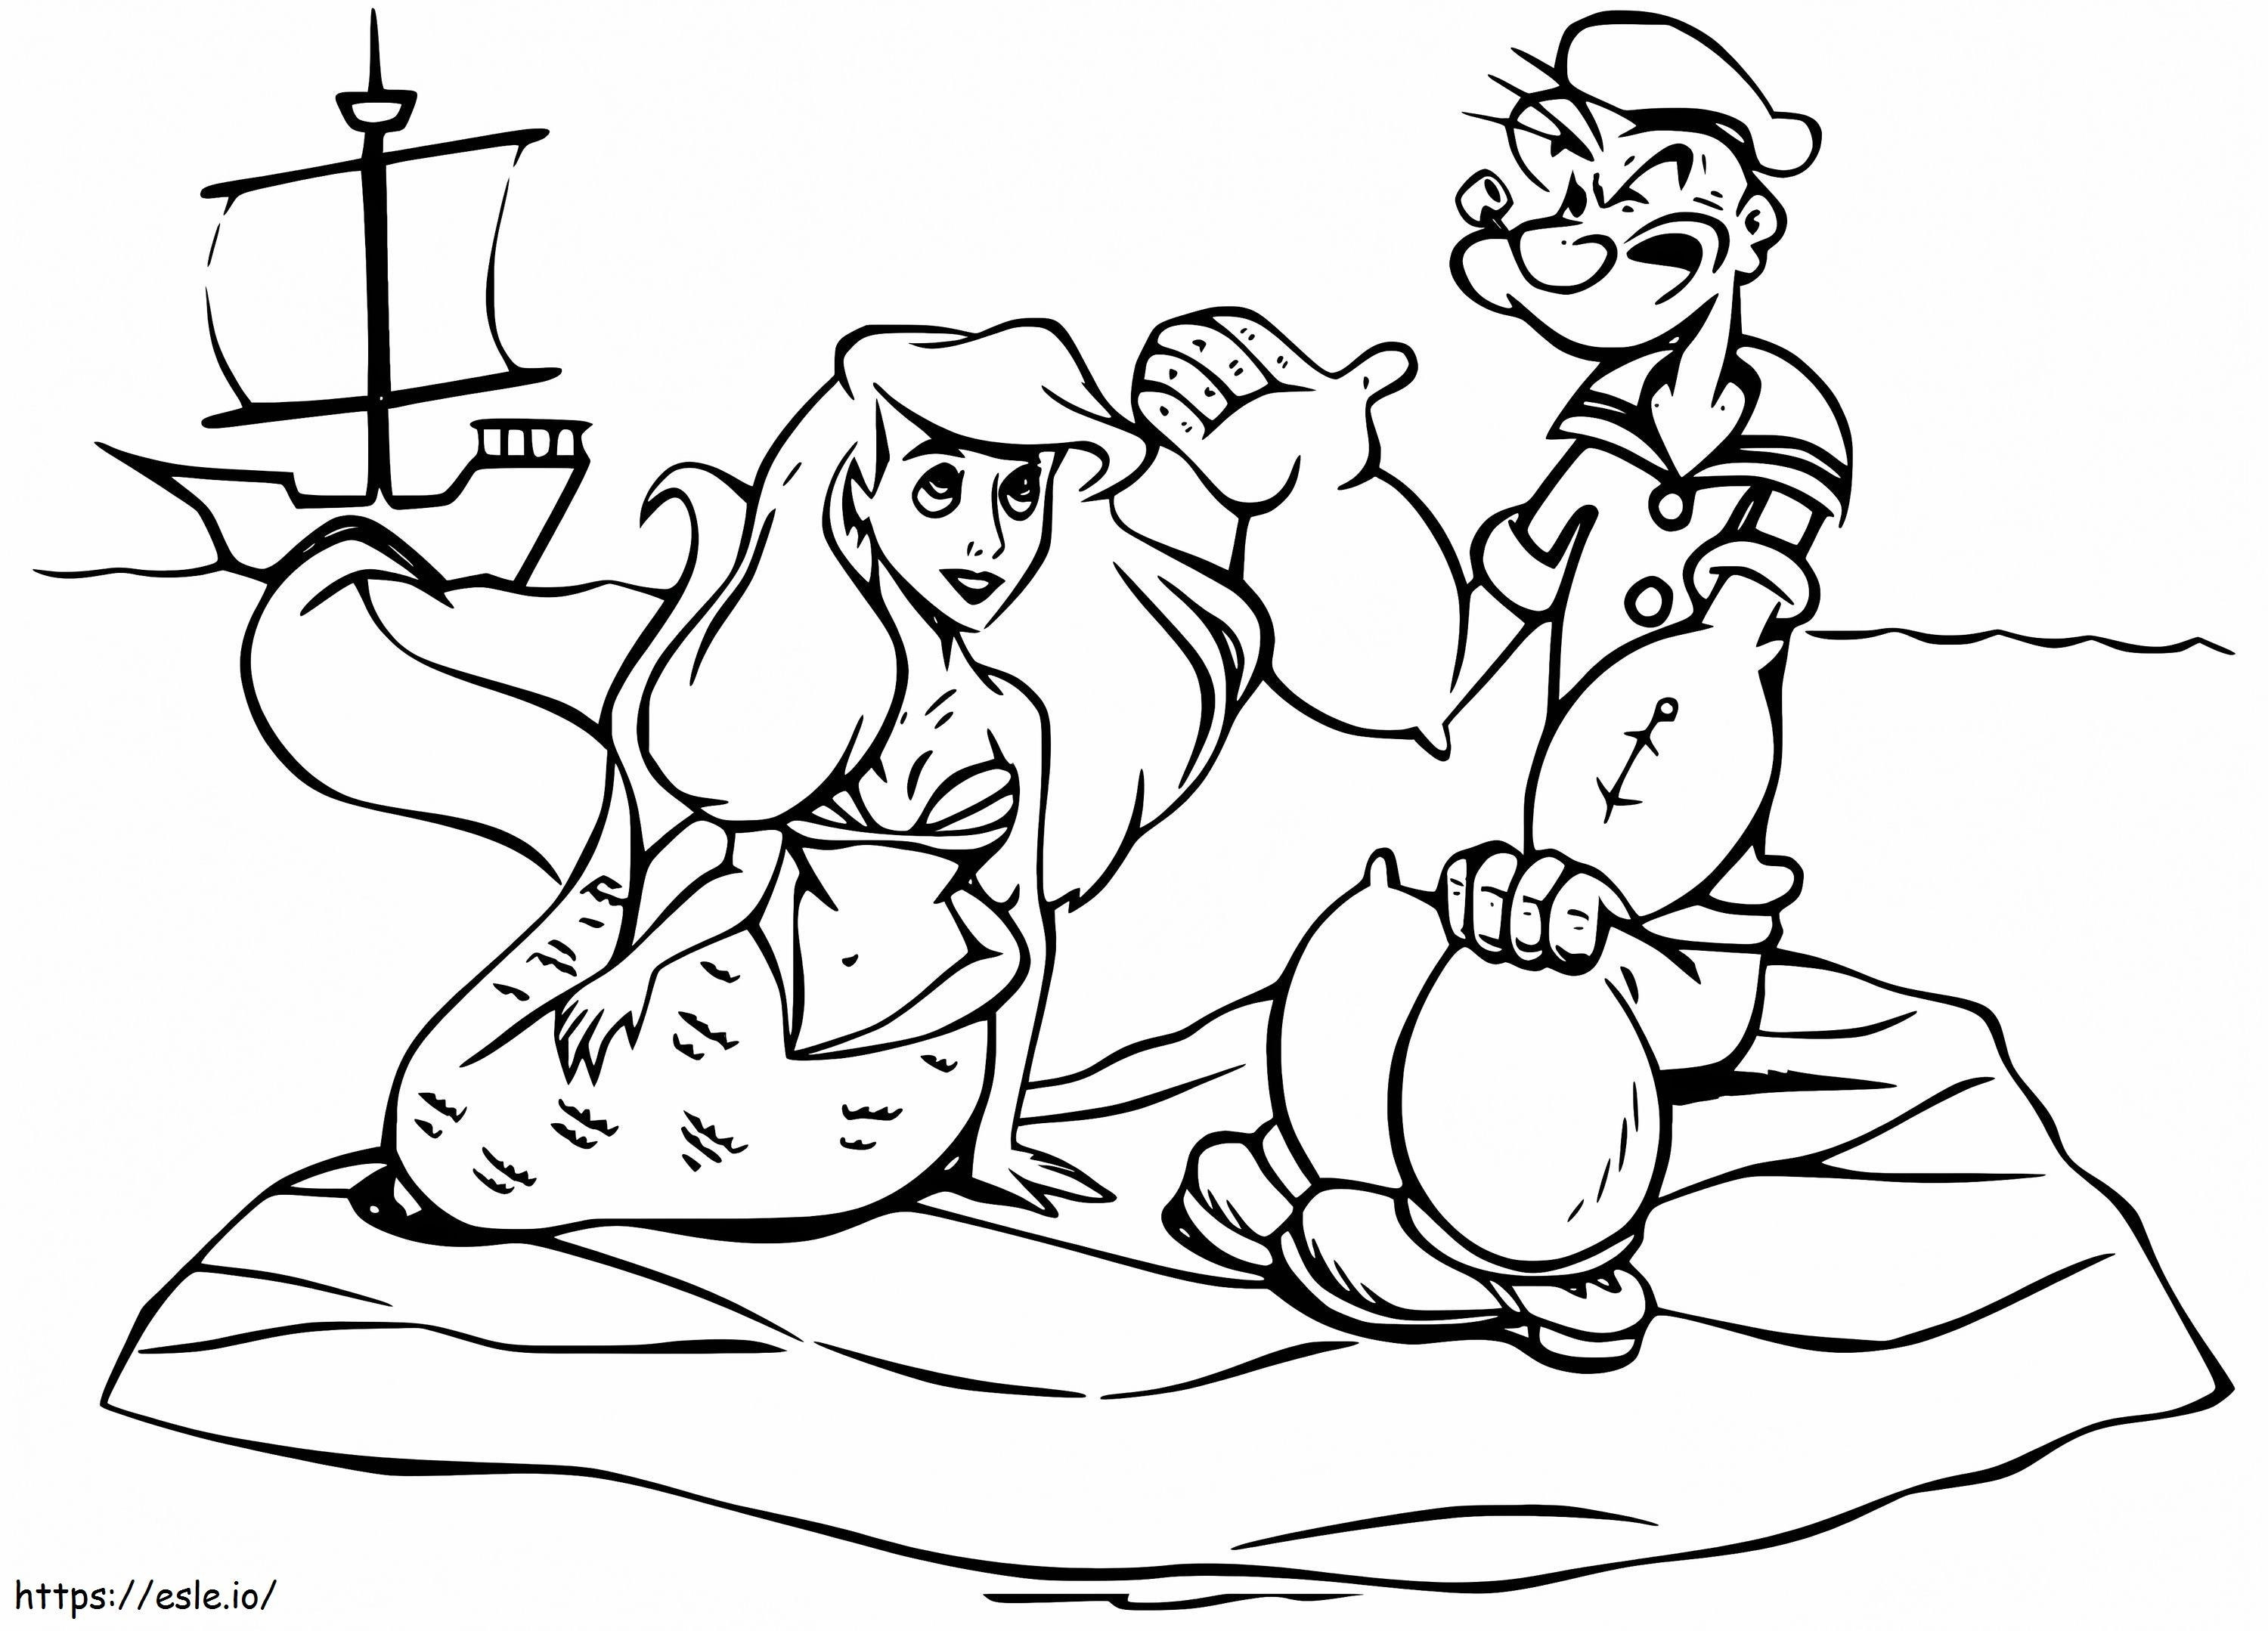 Popeye And Ariel coloring page